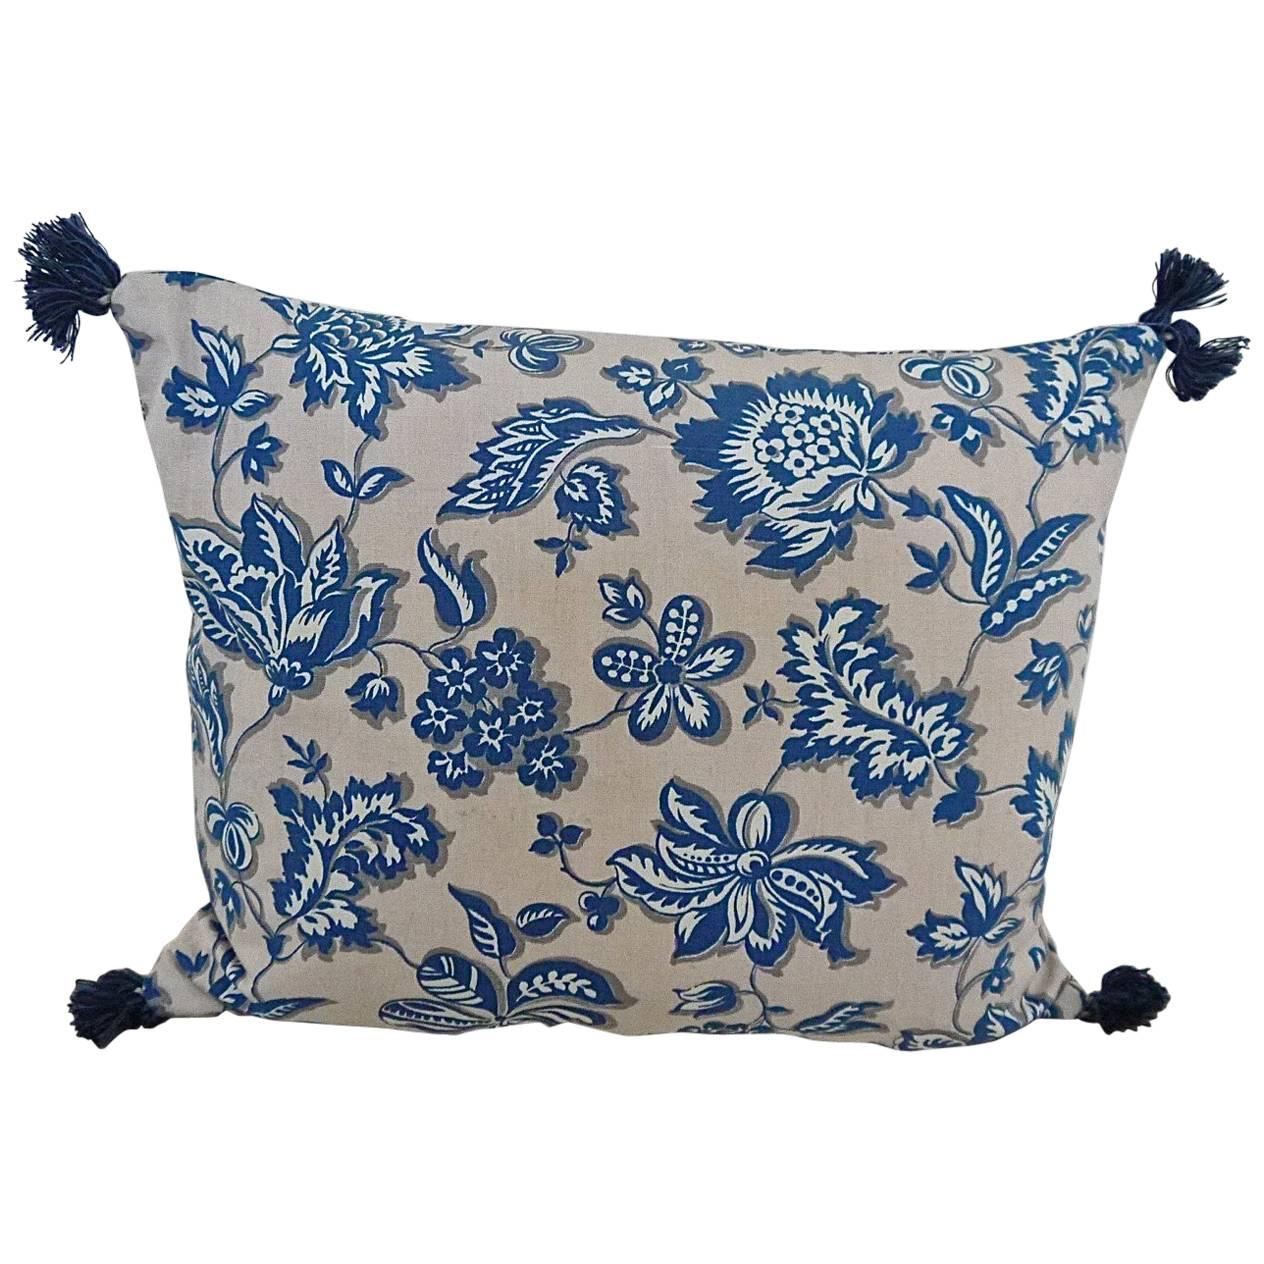 French Printed Cotton Blue and White Floral Pillow, circa 1930s For Sale